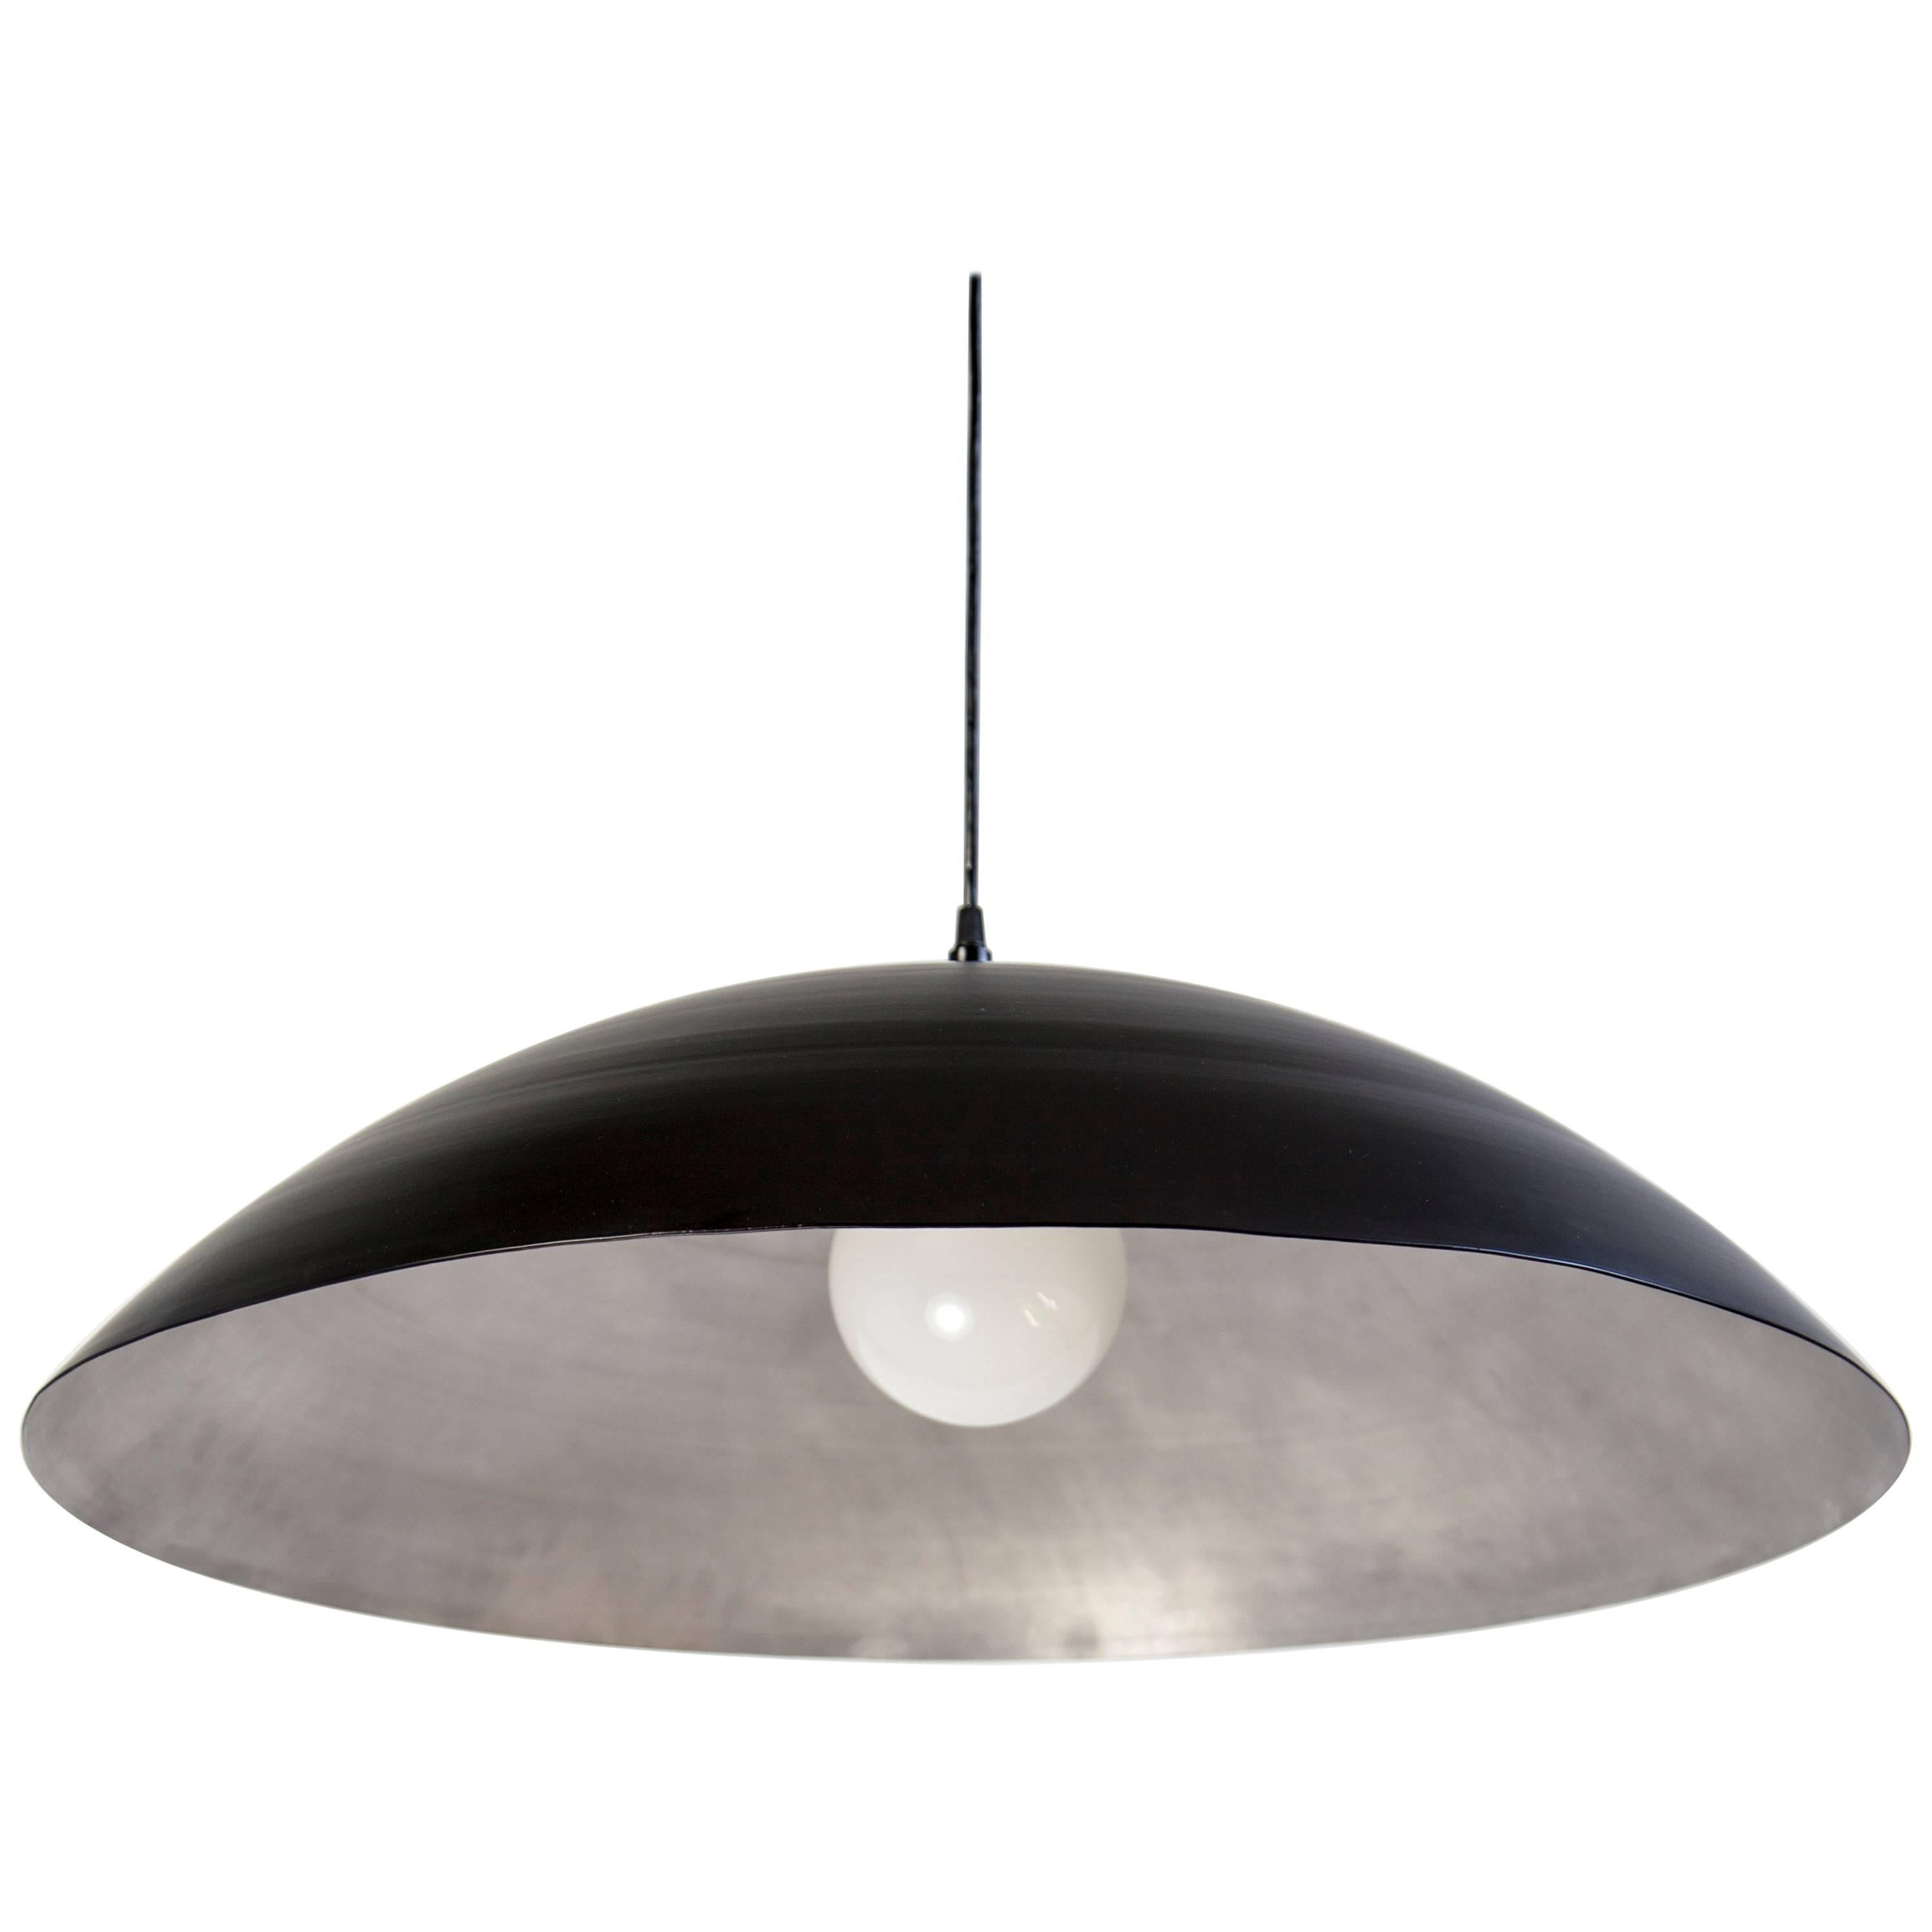 Customizable Oversized Pendant by RESEARCH Lighting, Black and Silver, MTO For Sale